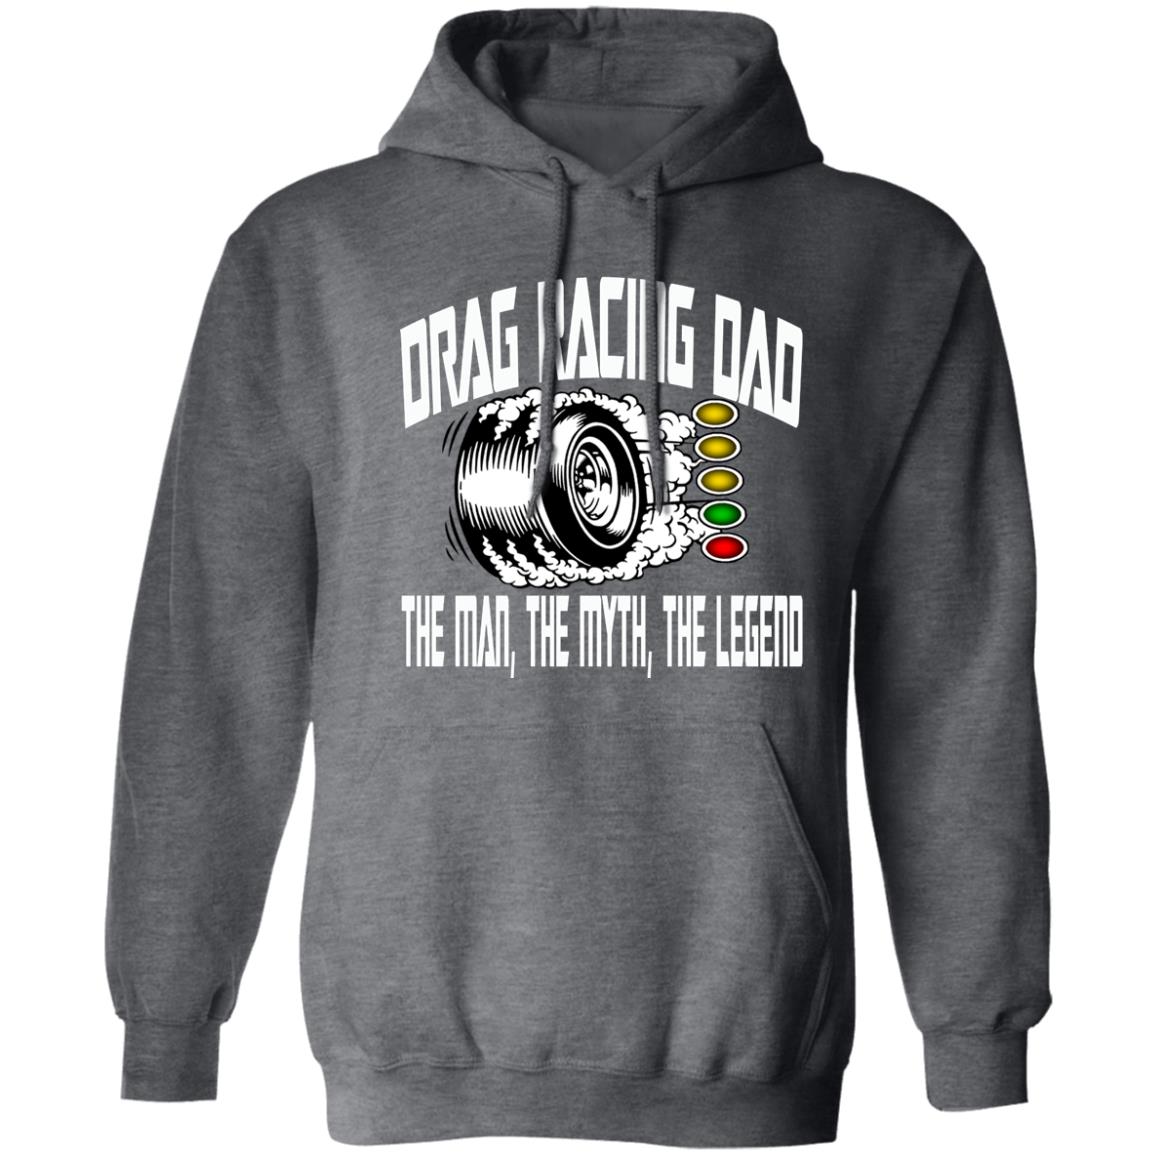 Drag Racing Dad Pullover Hoodie 8 oz (Closeout)